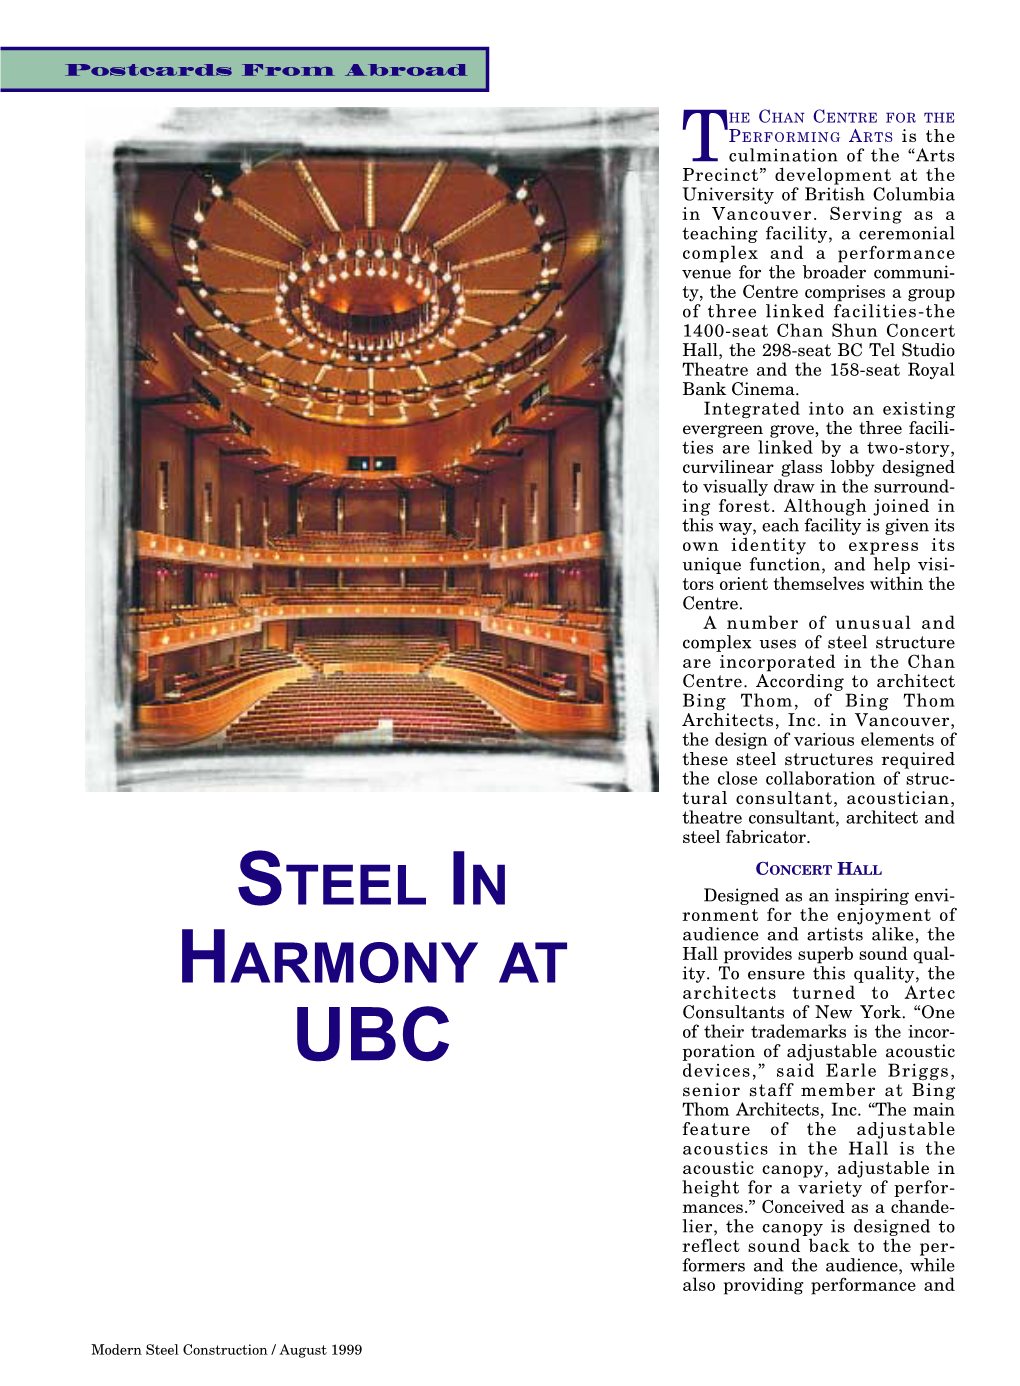 Steel in Harmony At